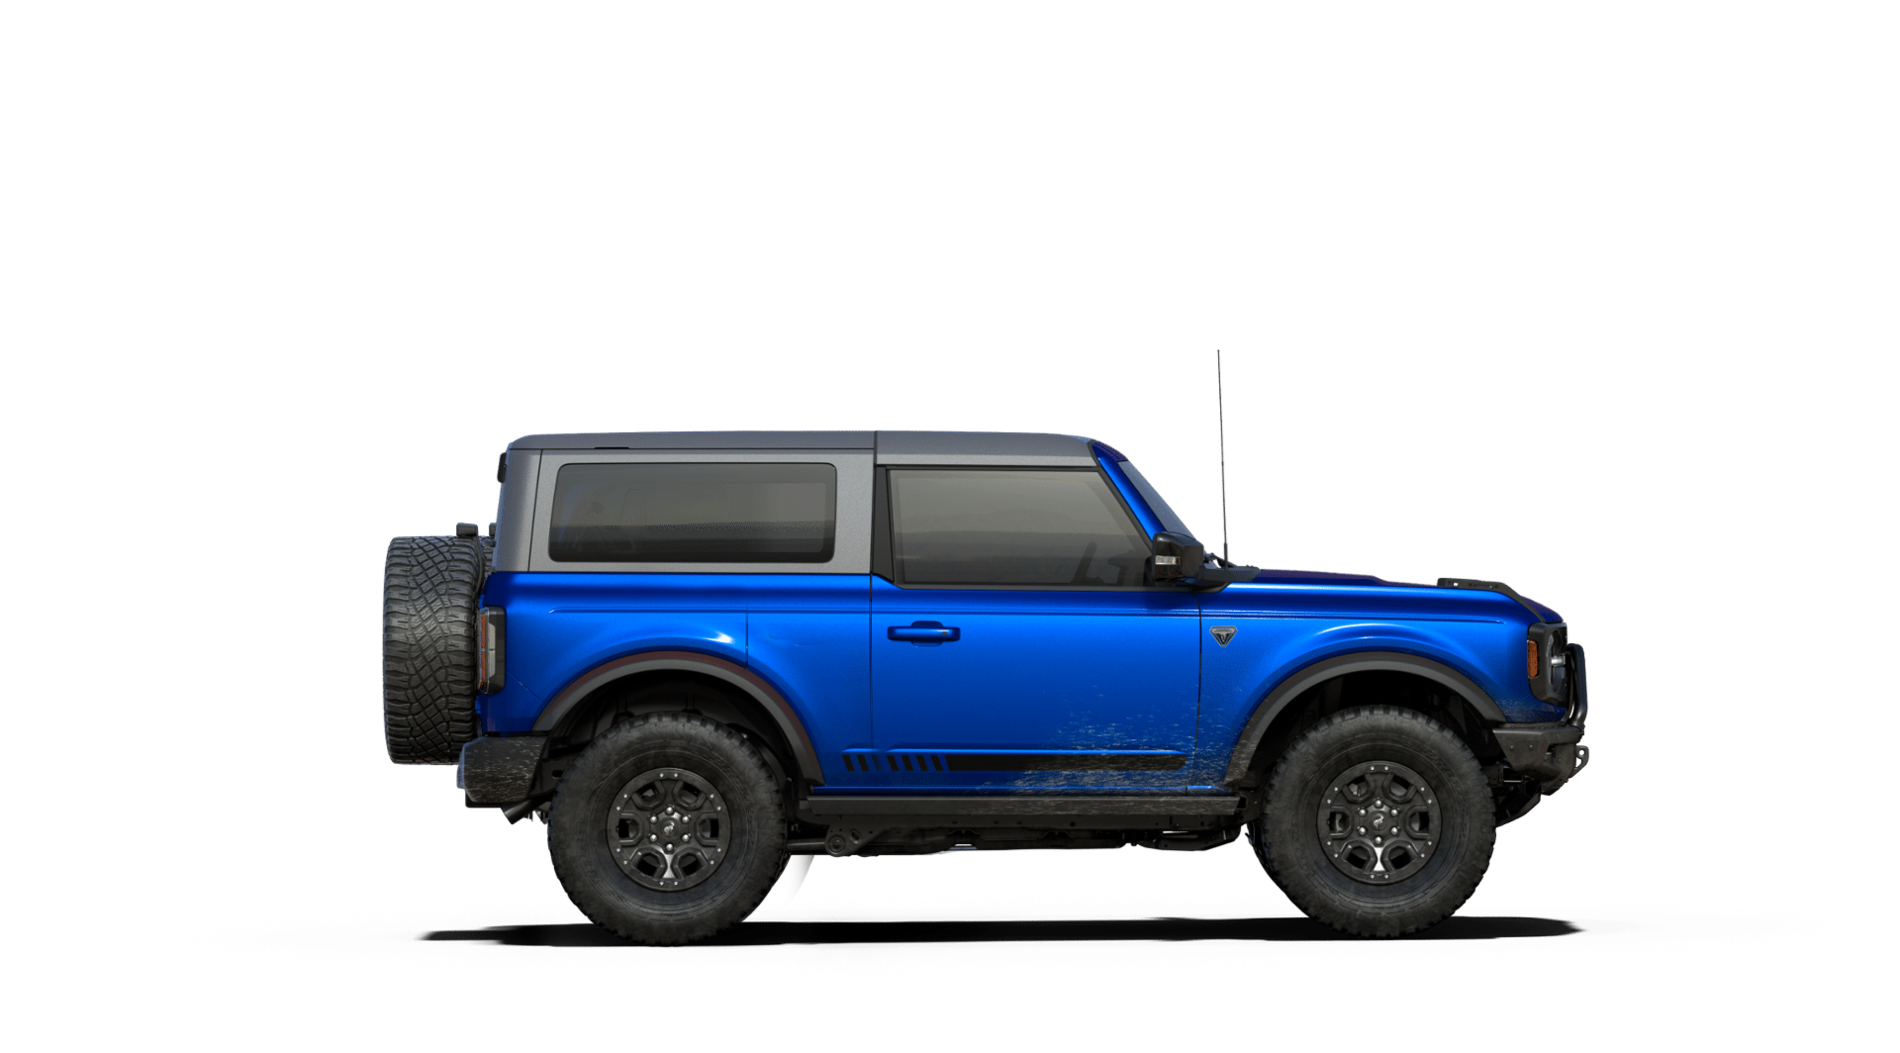 Ford Bronco Bronco Longboard Concept – 2DR LWB Imagined vehicle (1)